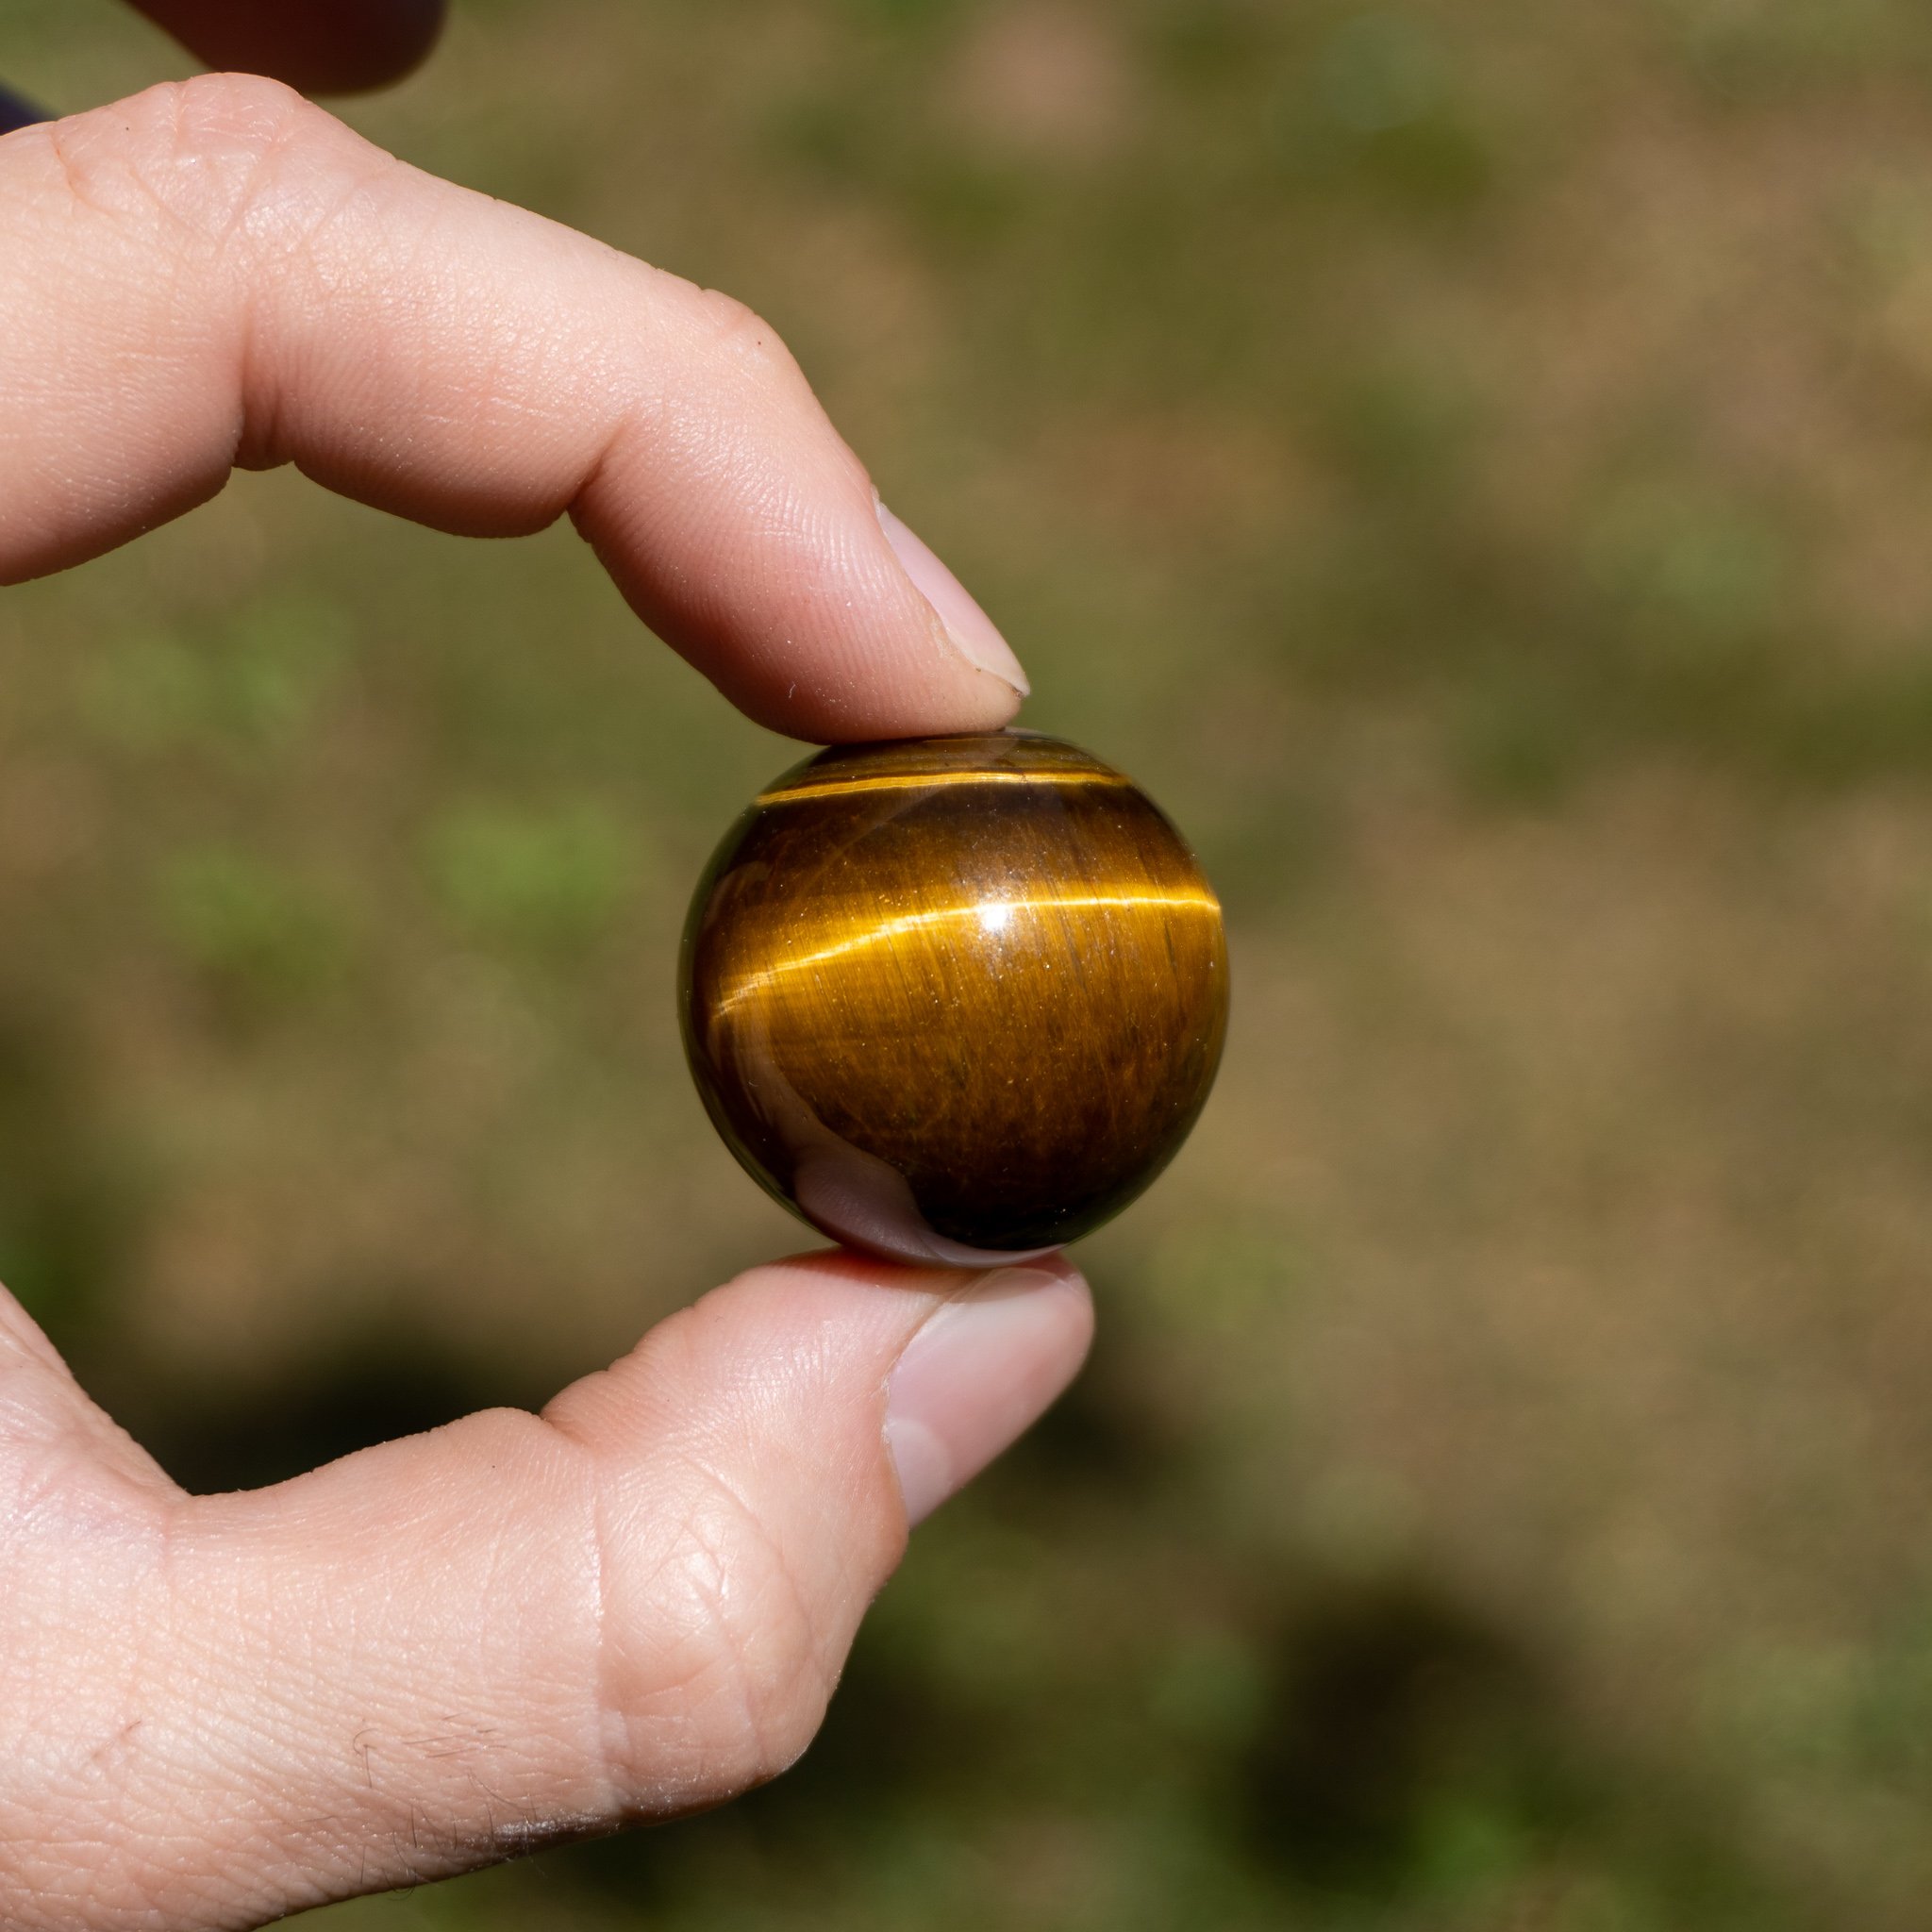 Small Tiger's Eye Spheres